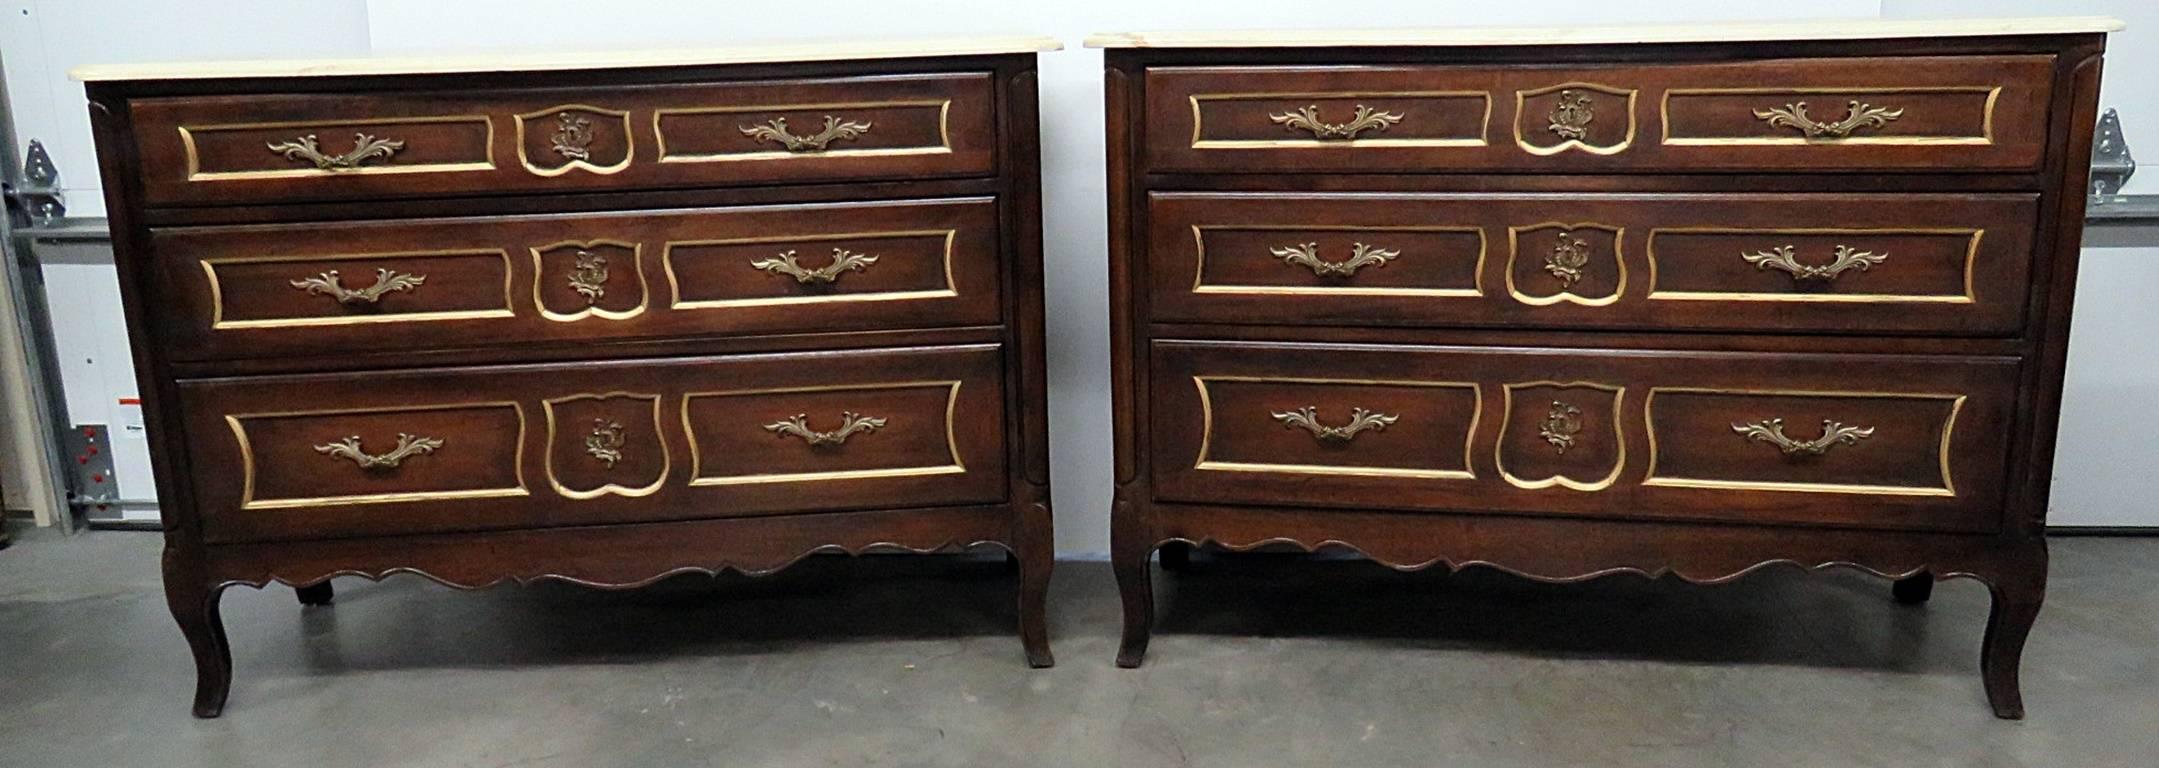 Pair of Drexel marble-top three-drawer commodes.